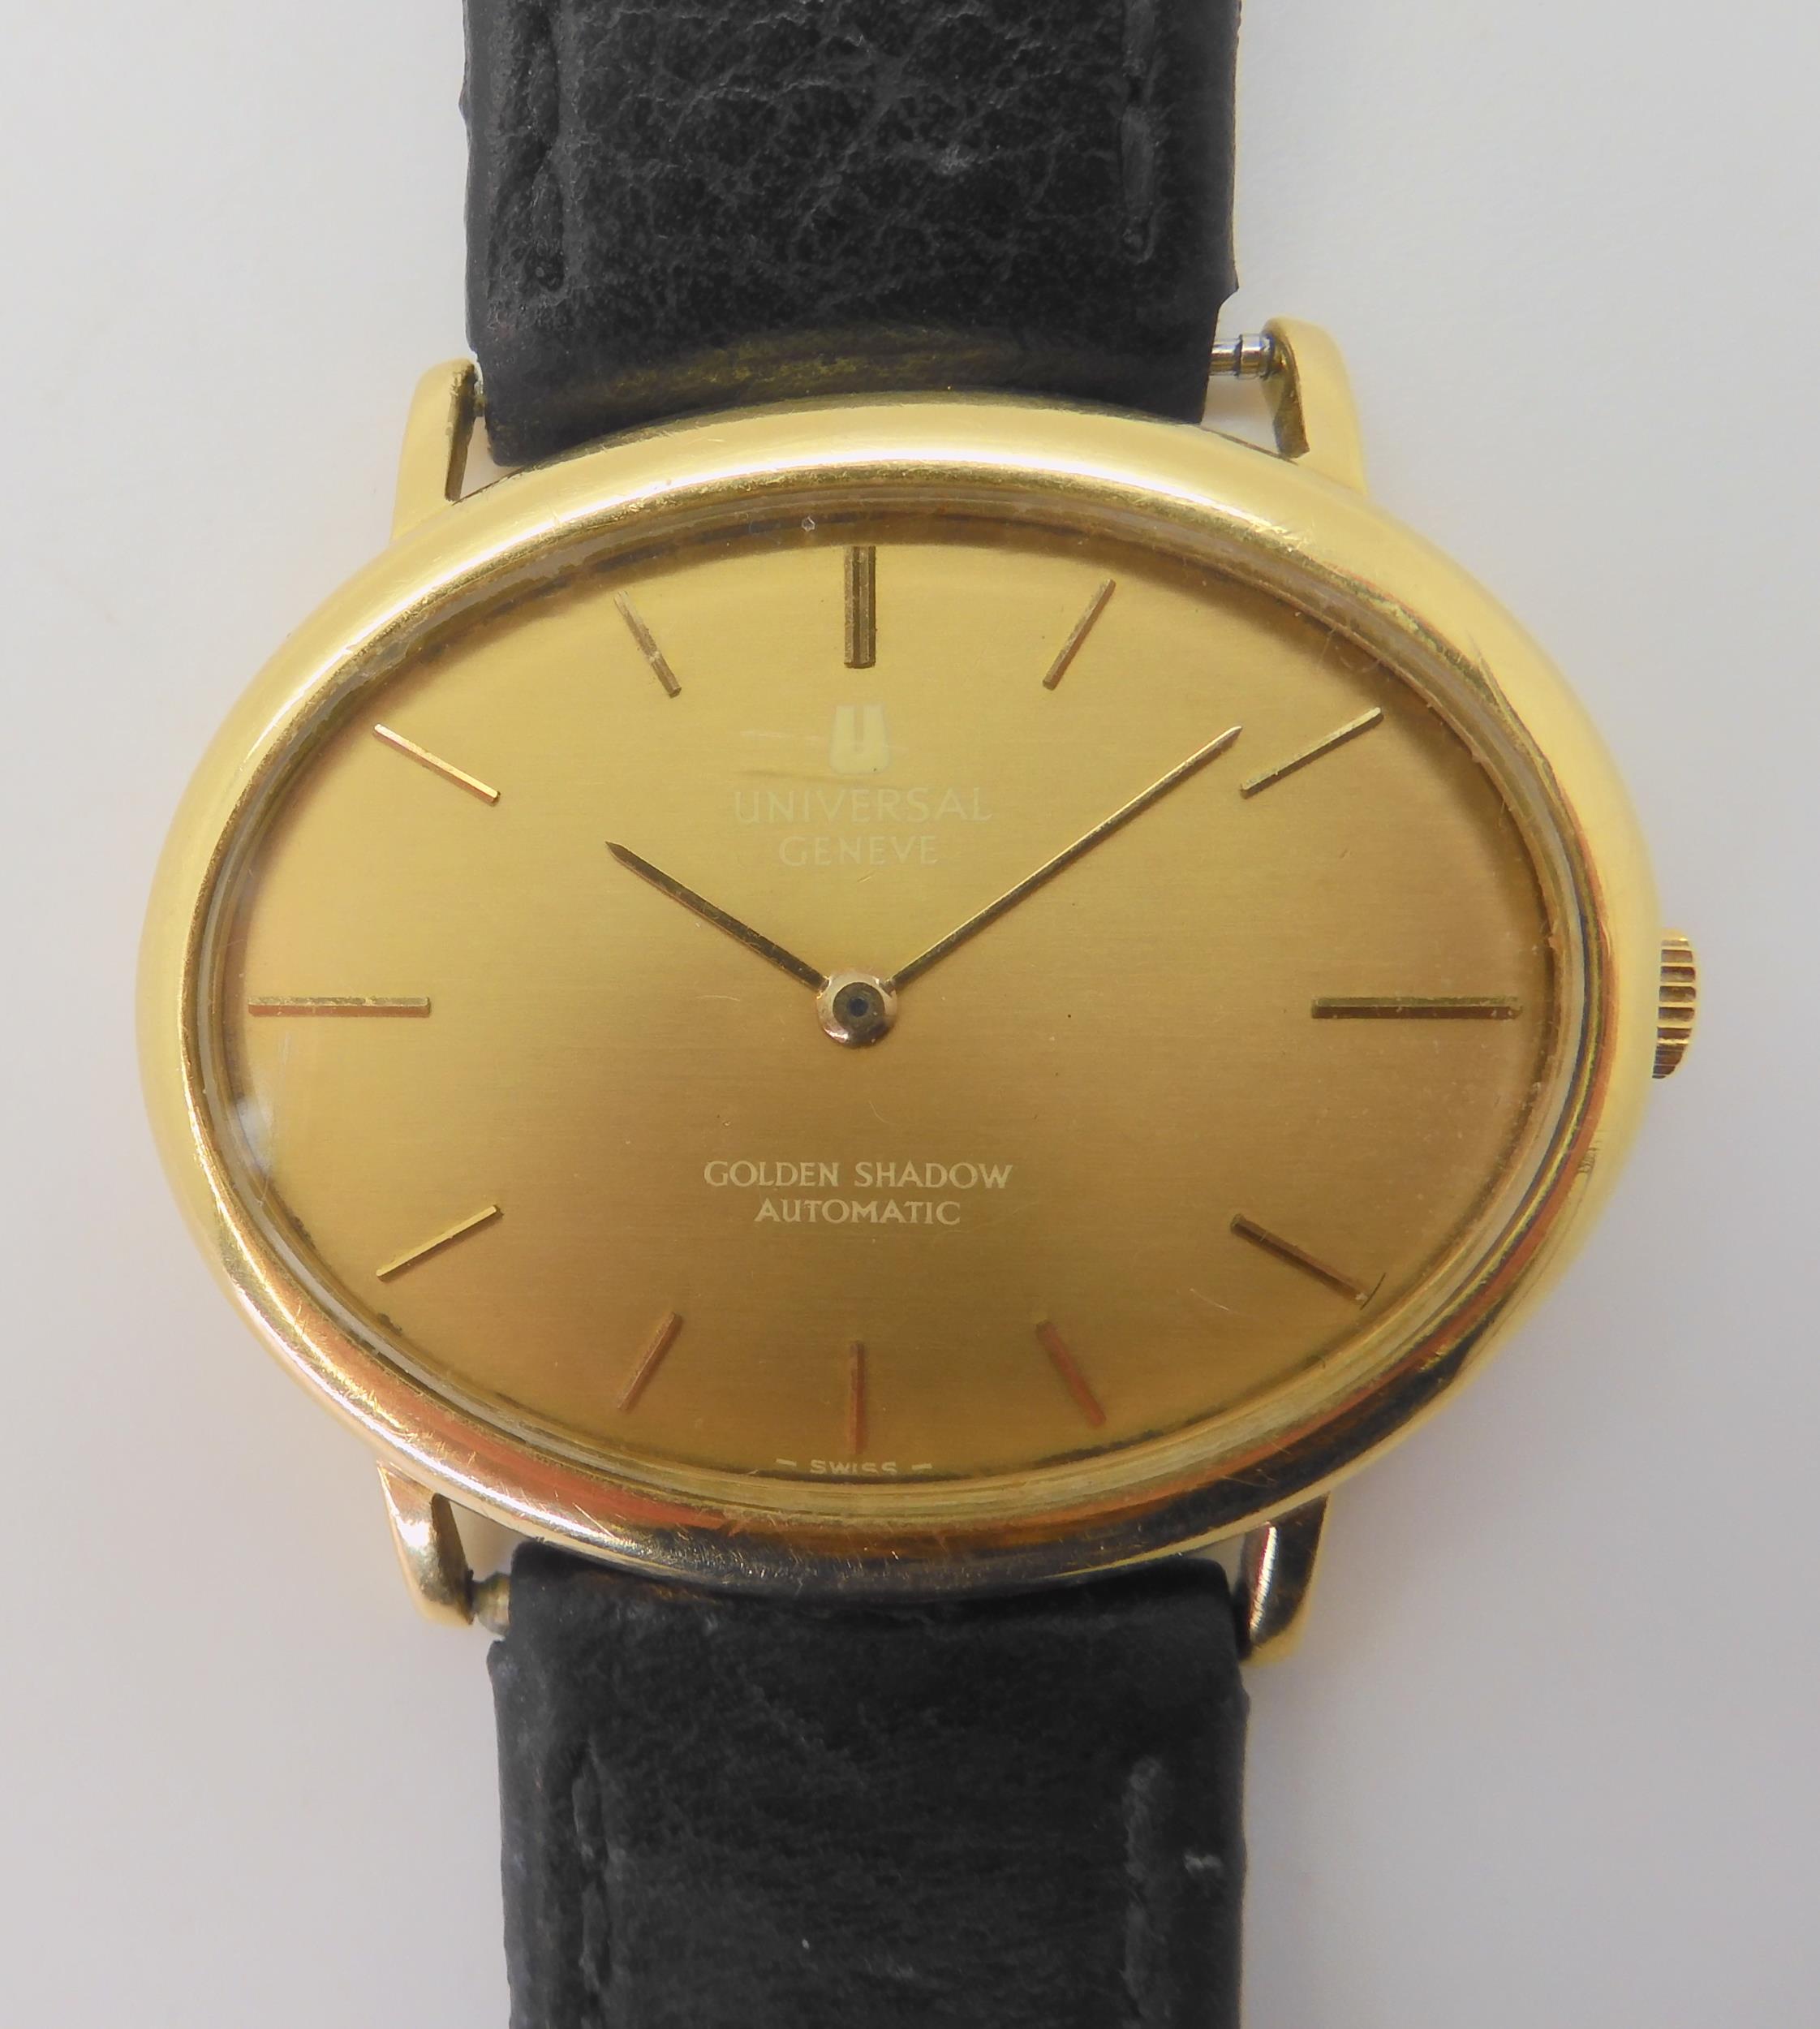 A UNIVERSAL GENEVE GOLDEN SHADOW  with an automatic movement, the case in 18ct gold with Swiss - Image 4 of 6